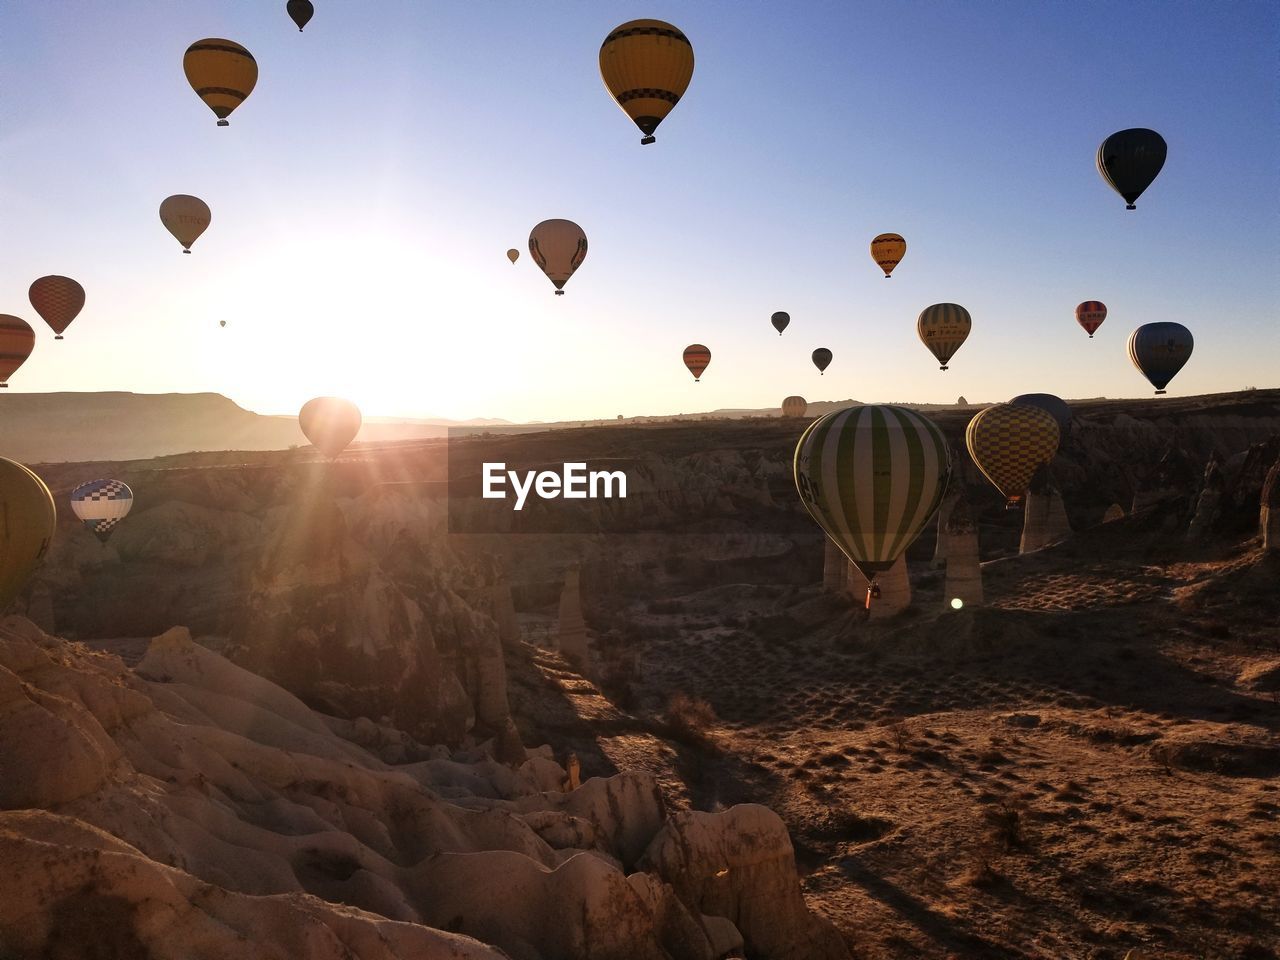 HOT AIR BALLOONS FLYING OVER LANDSCAPE